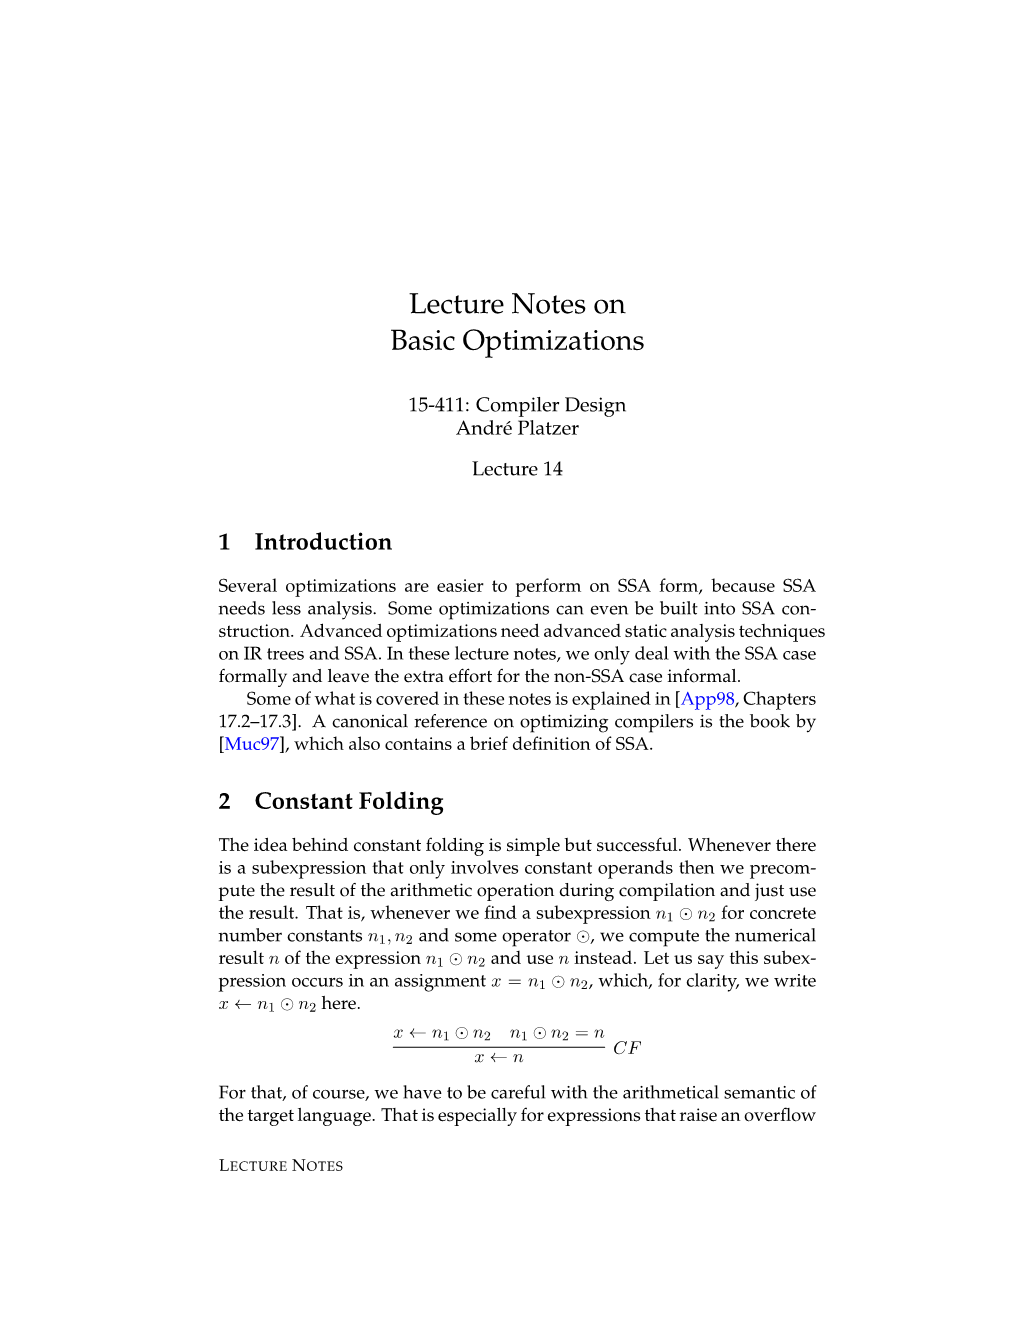 Lecture Notes on Basic Optimizations